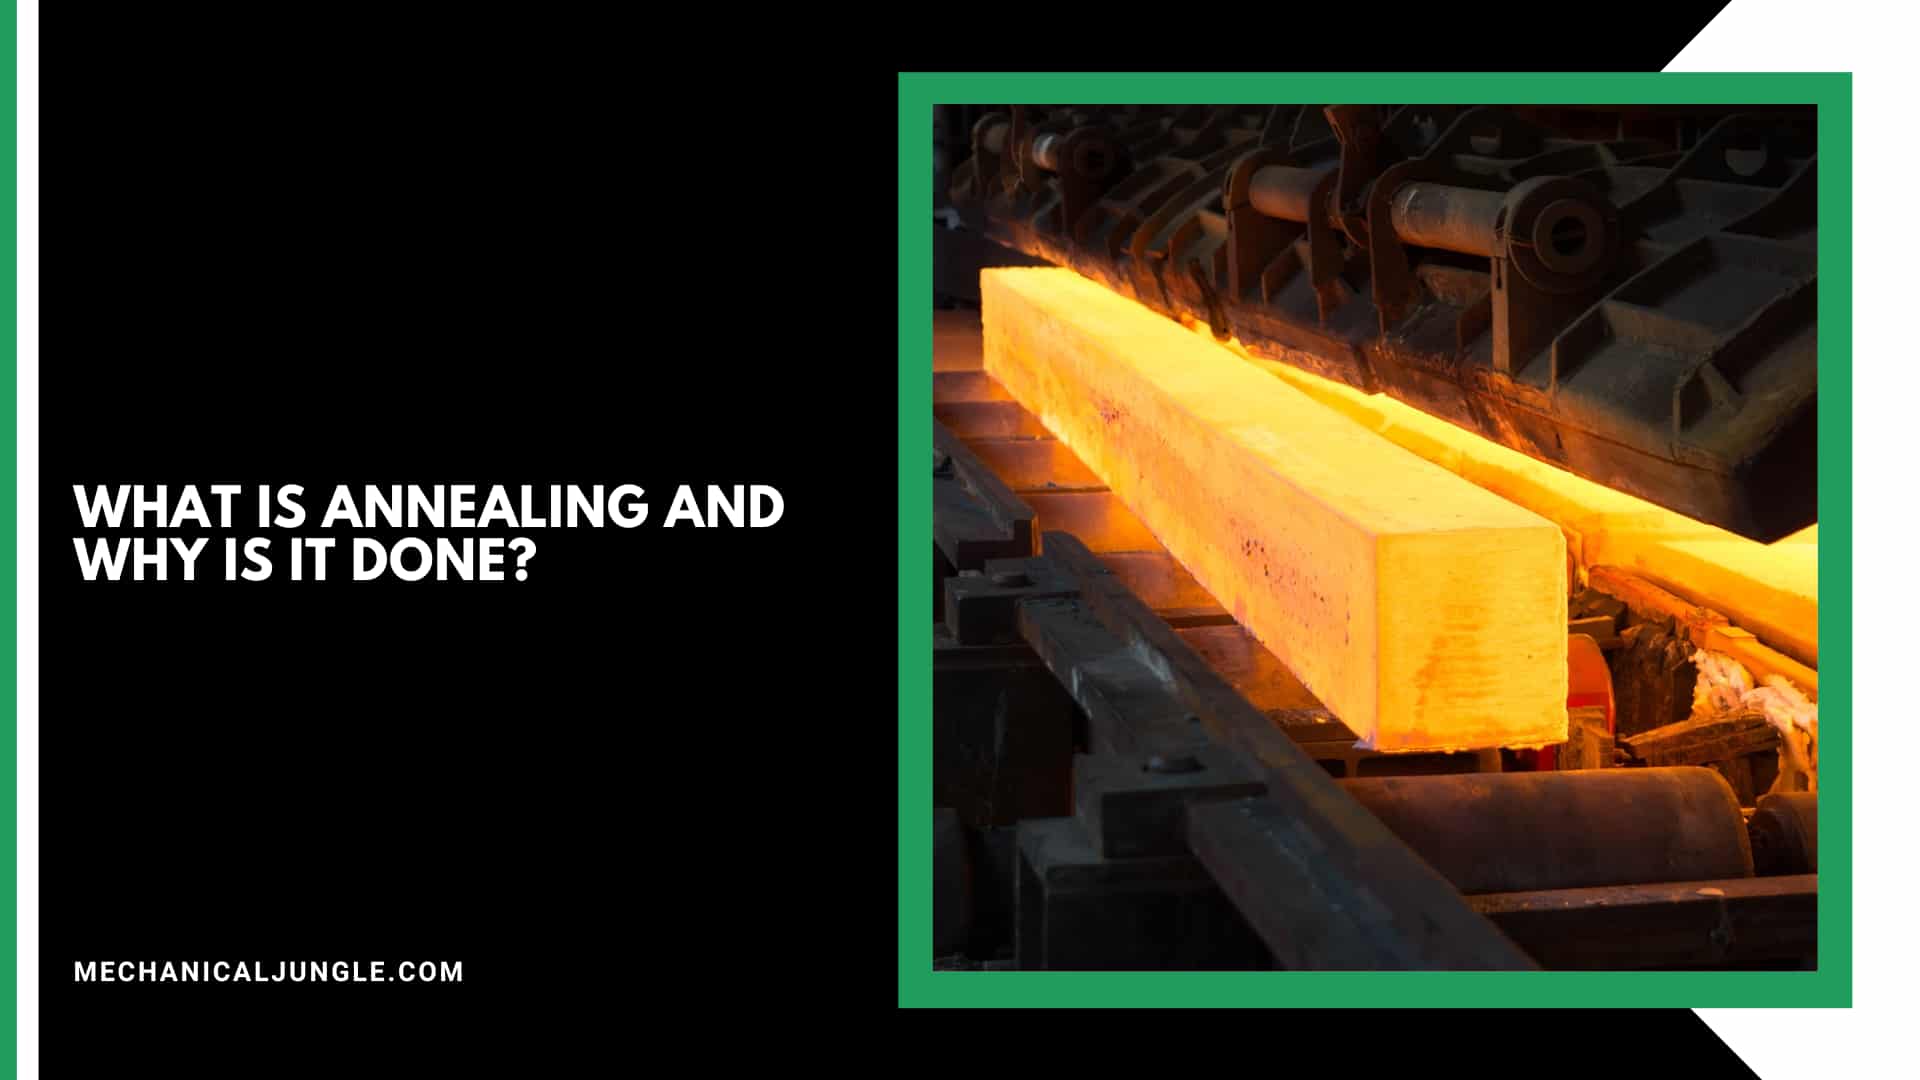 What Is Annealing and Why Is It Done?